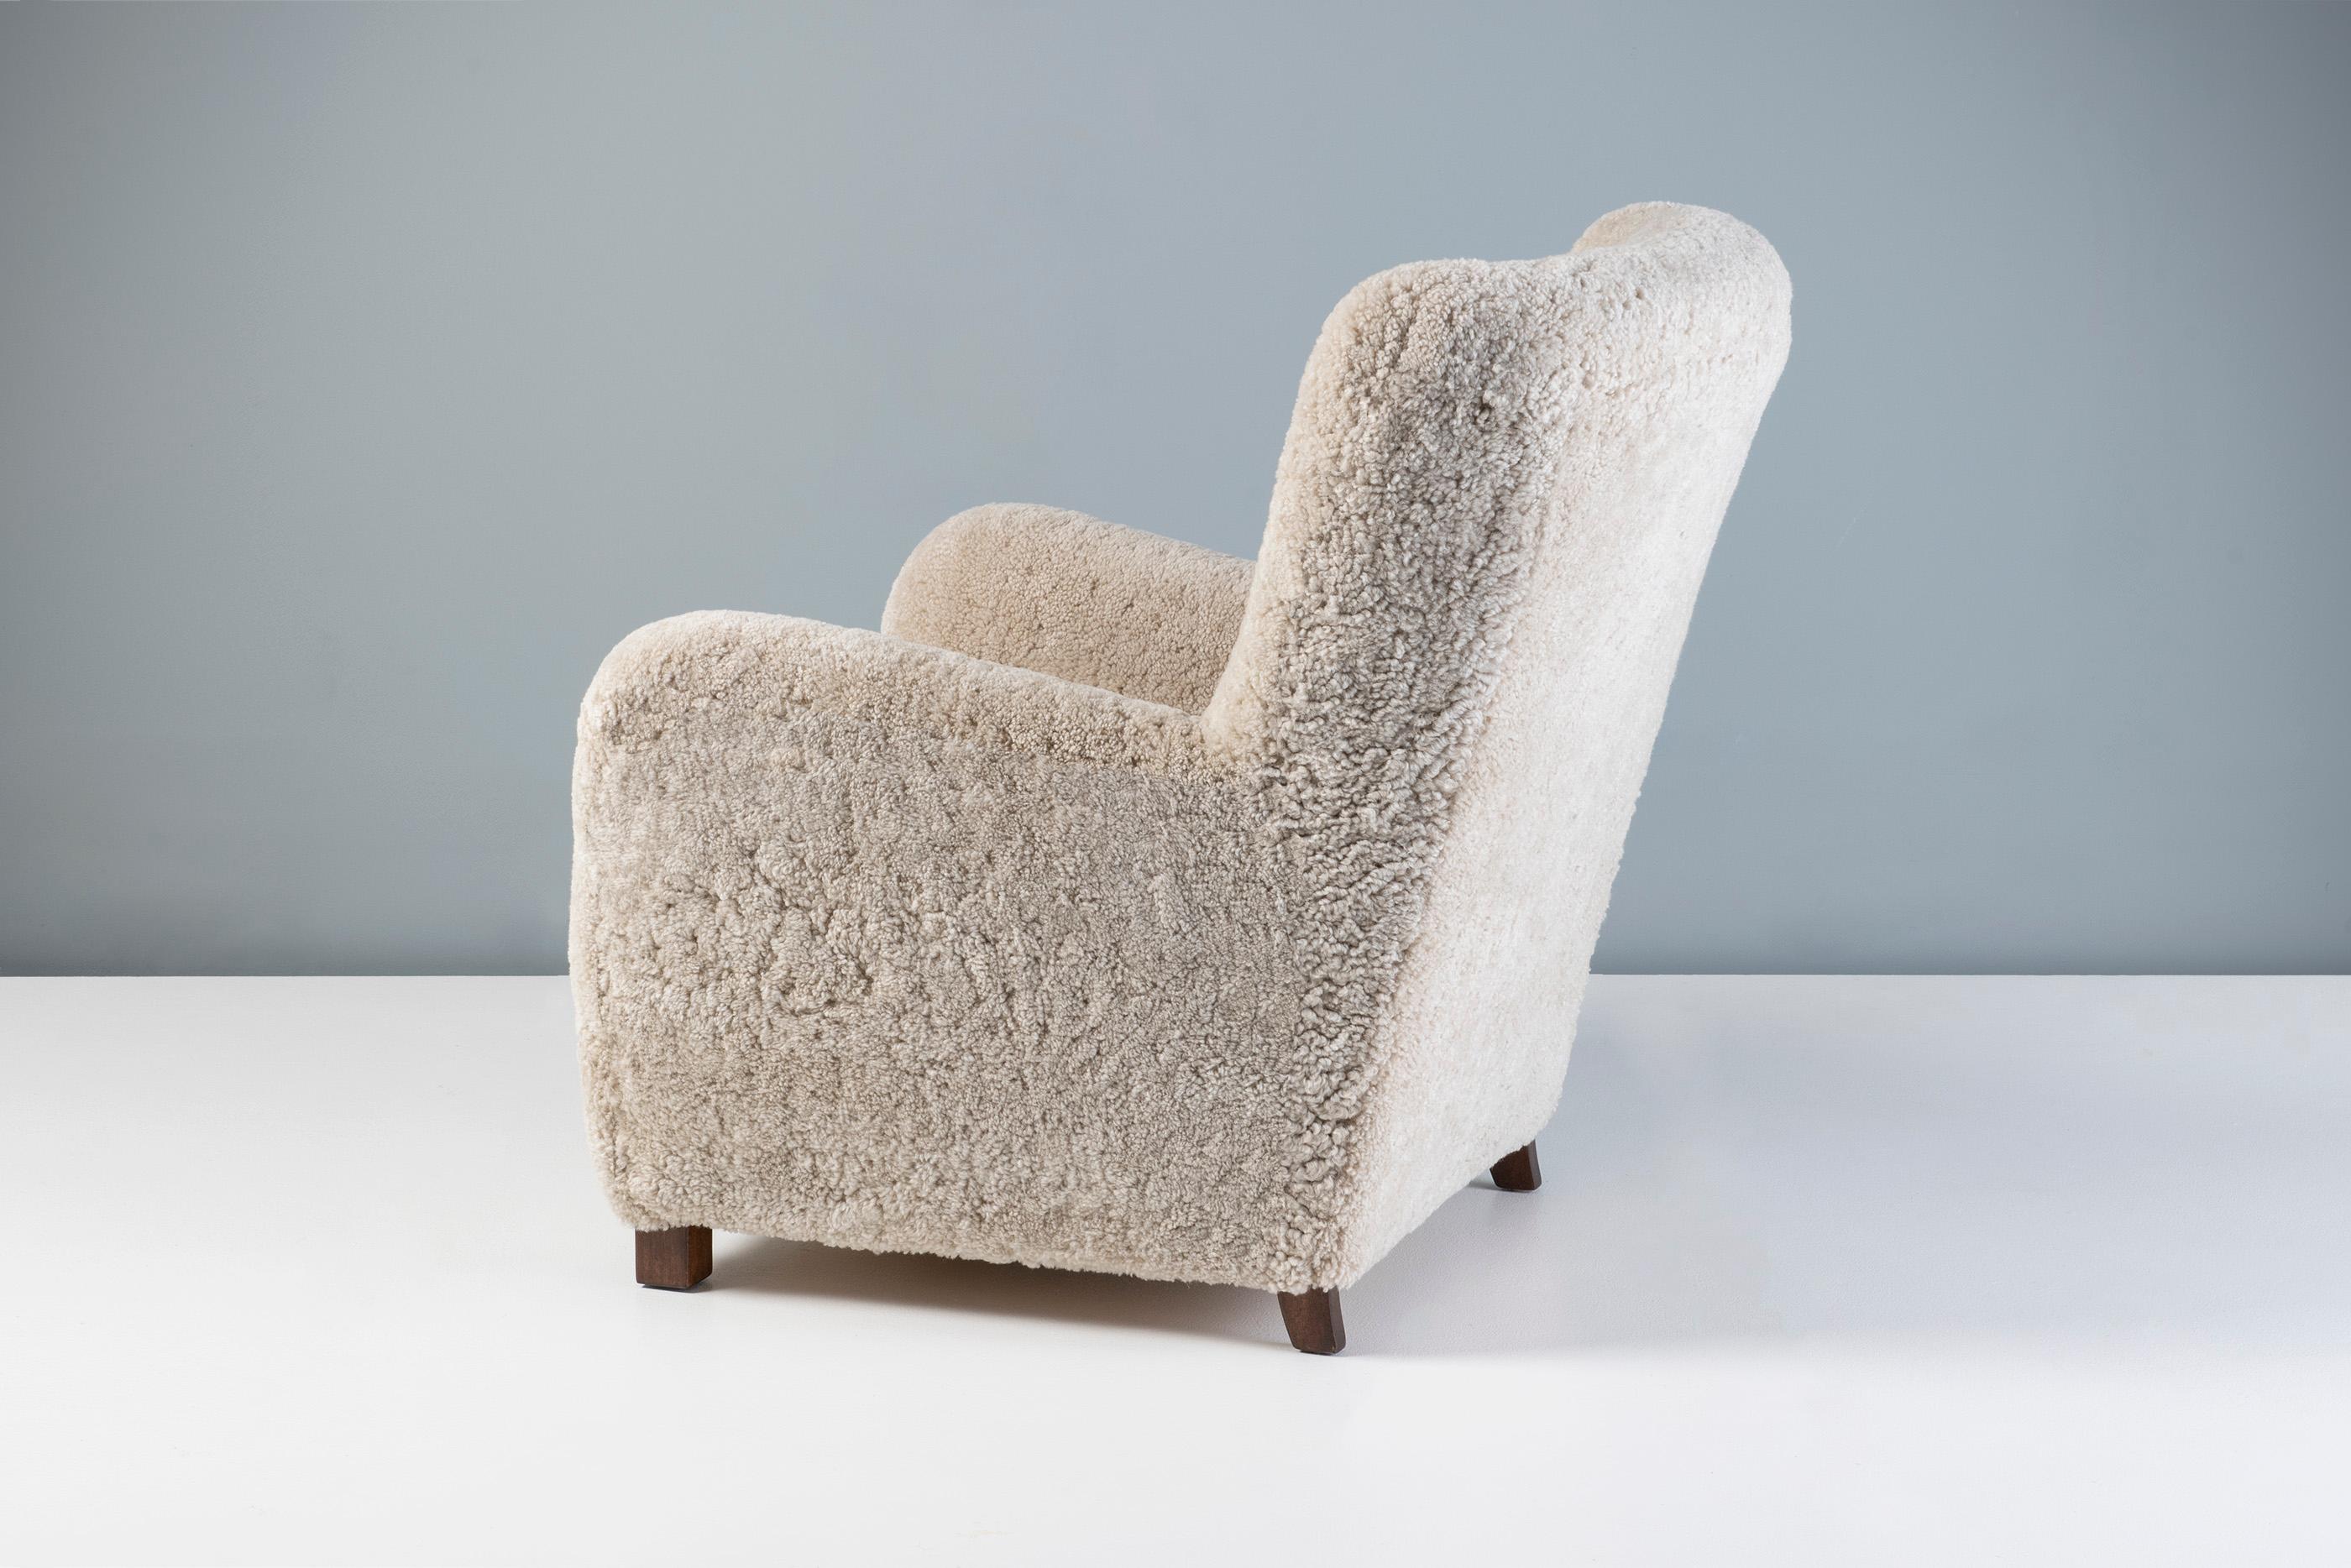 Danish Cabinetmaker Sheepskin Armchair, circa 1940s.

This tall Lounge chair produced by a Danish Cabinetmaker in the 1940s and is typical of Danish lounge chair designs of the day. It features a curved wing-back with stained beech legs. The chair